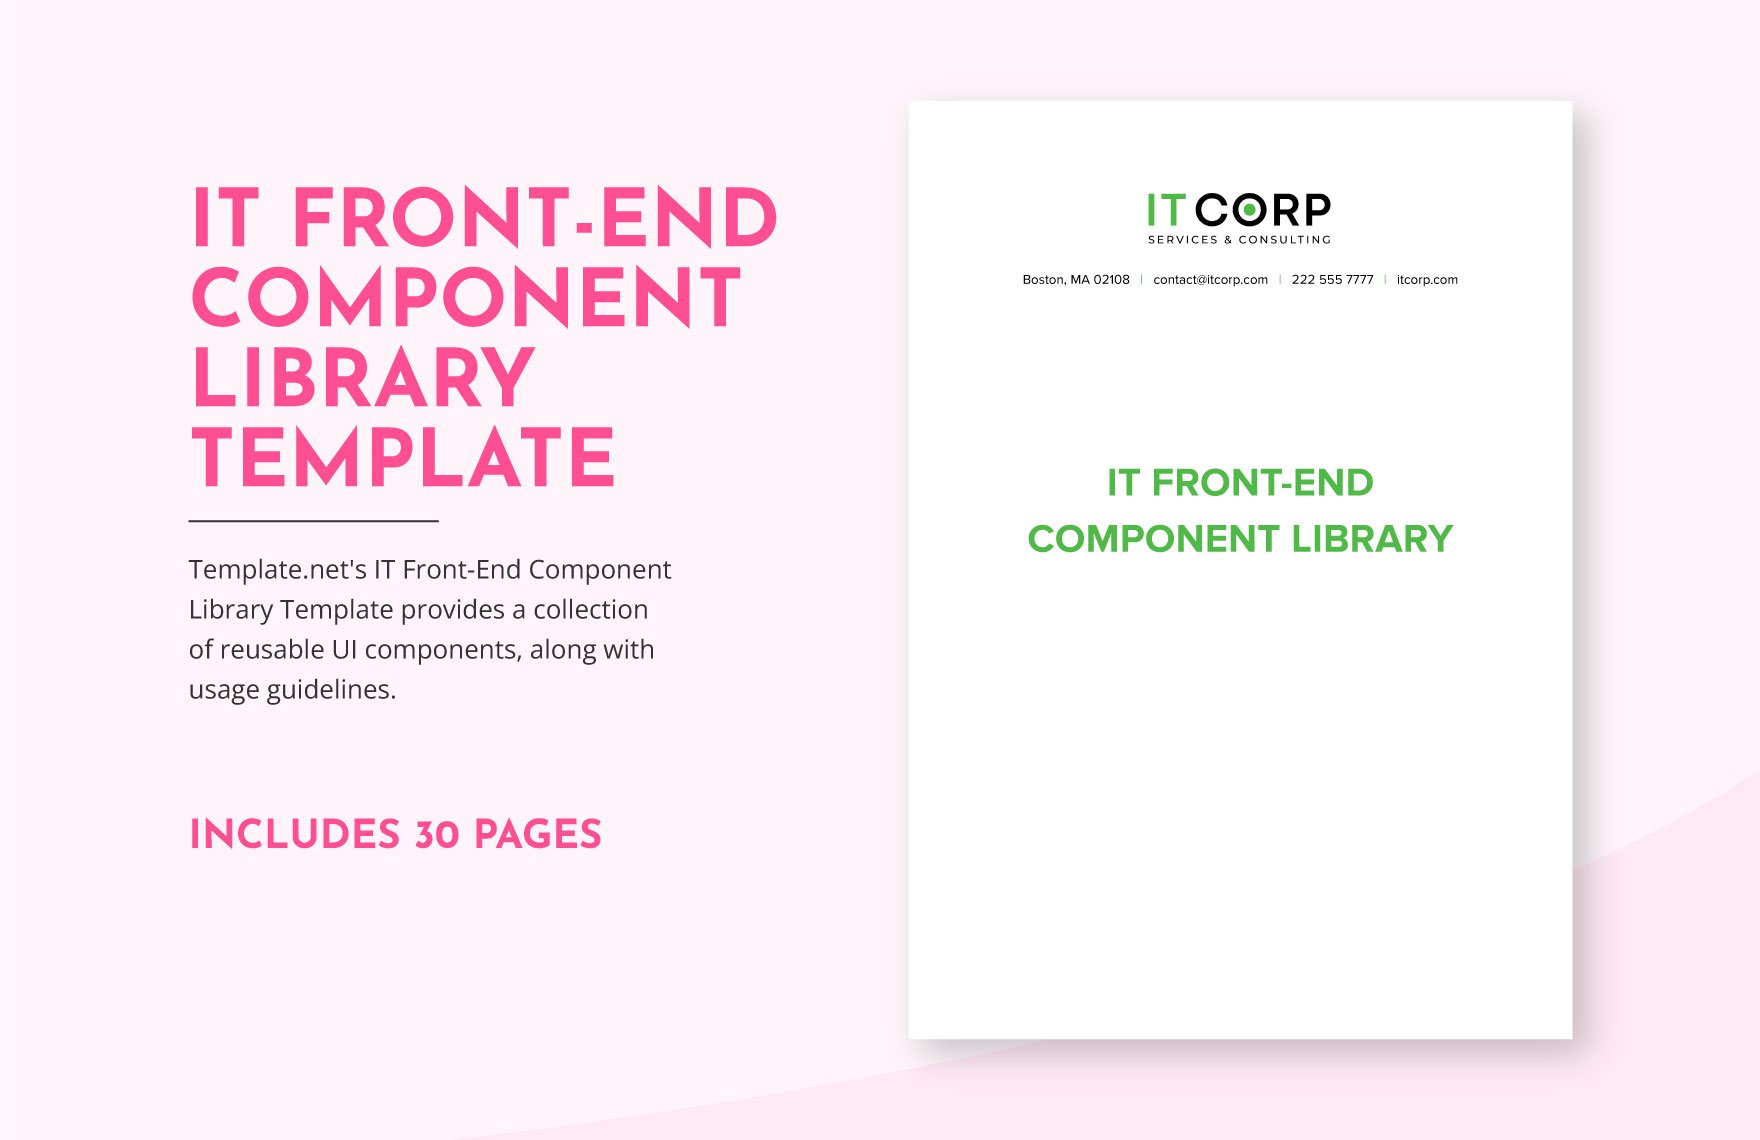 IT Front-End Component Library Template